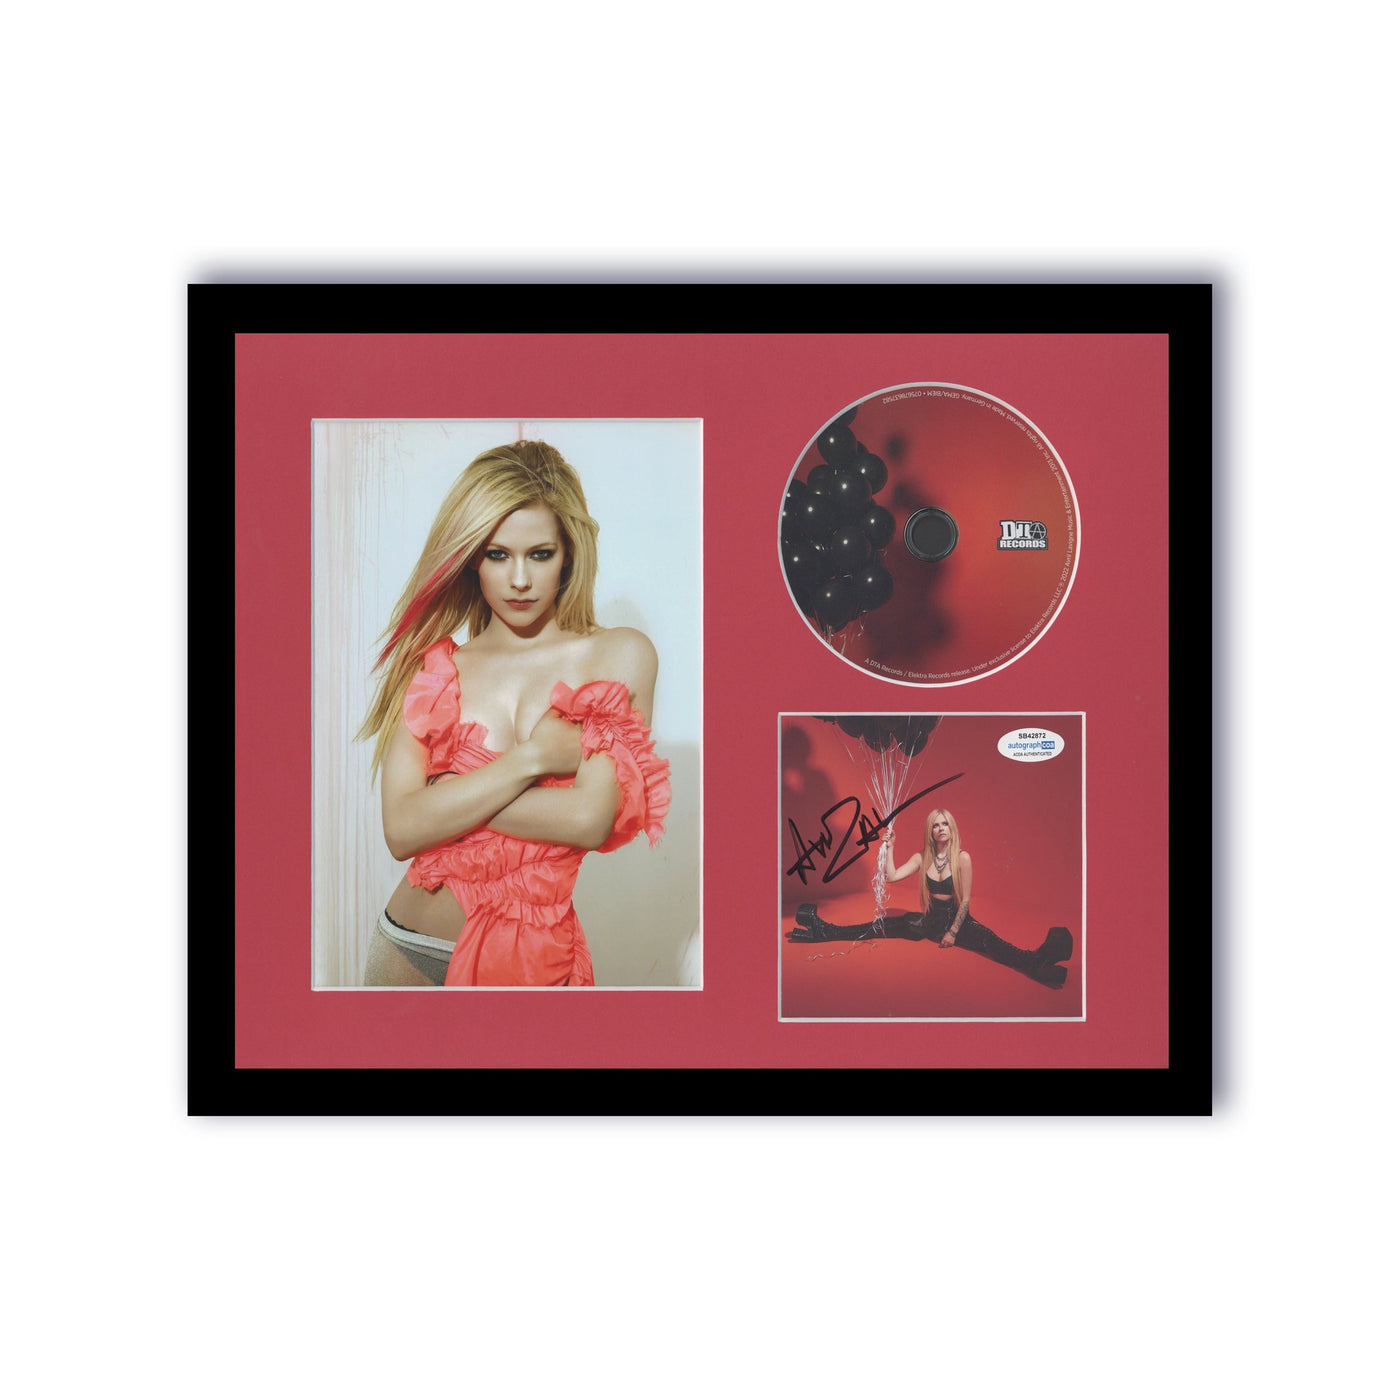 Avril Lavigne Autographed Signed 11x14 Framed CD Photo Love Sux ACOA